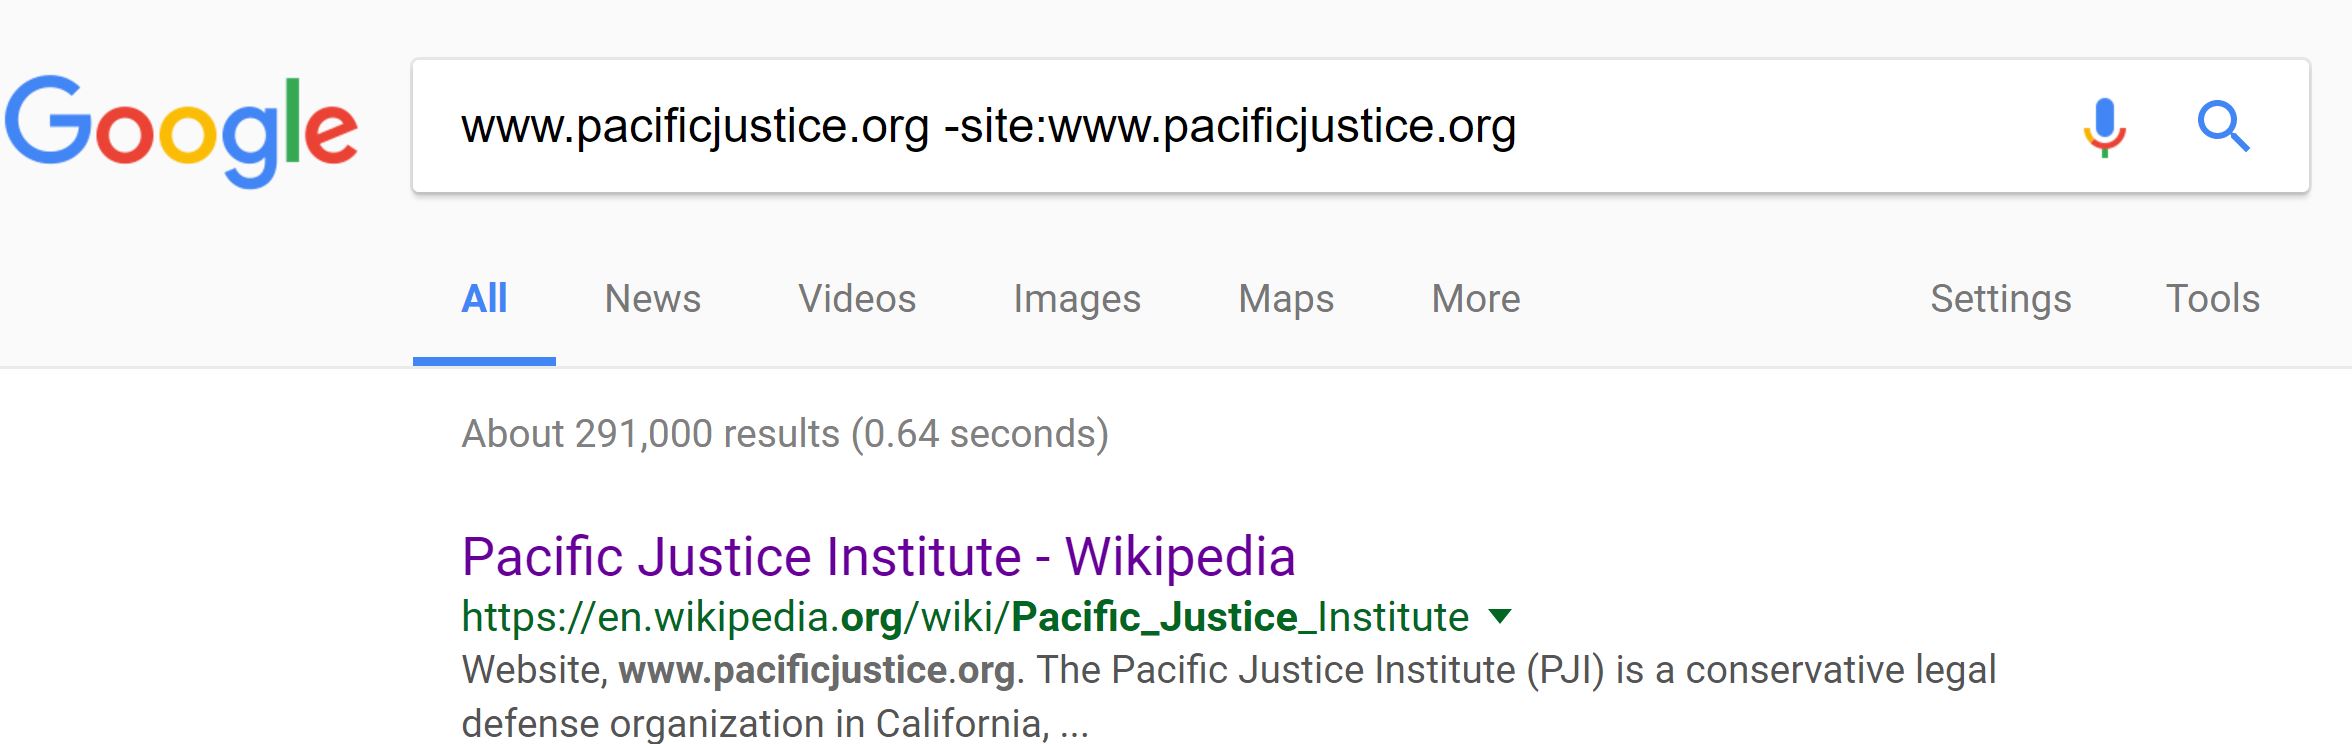 Google search results for “www.pacificjustice.org -site:www.pacificjustice.org.” The search omits the site www.pacificjustice.org and brings up a Wikipedia article as the first result.